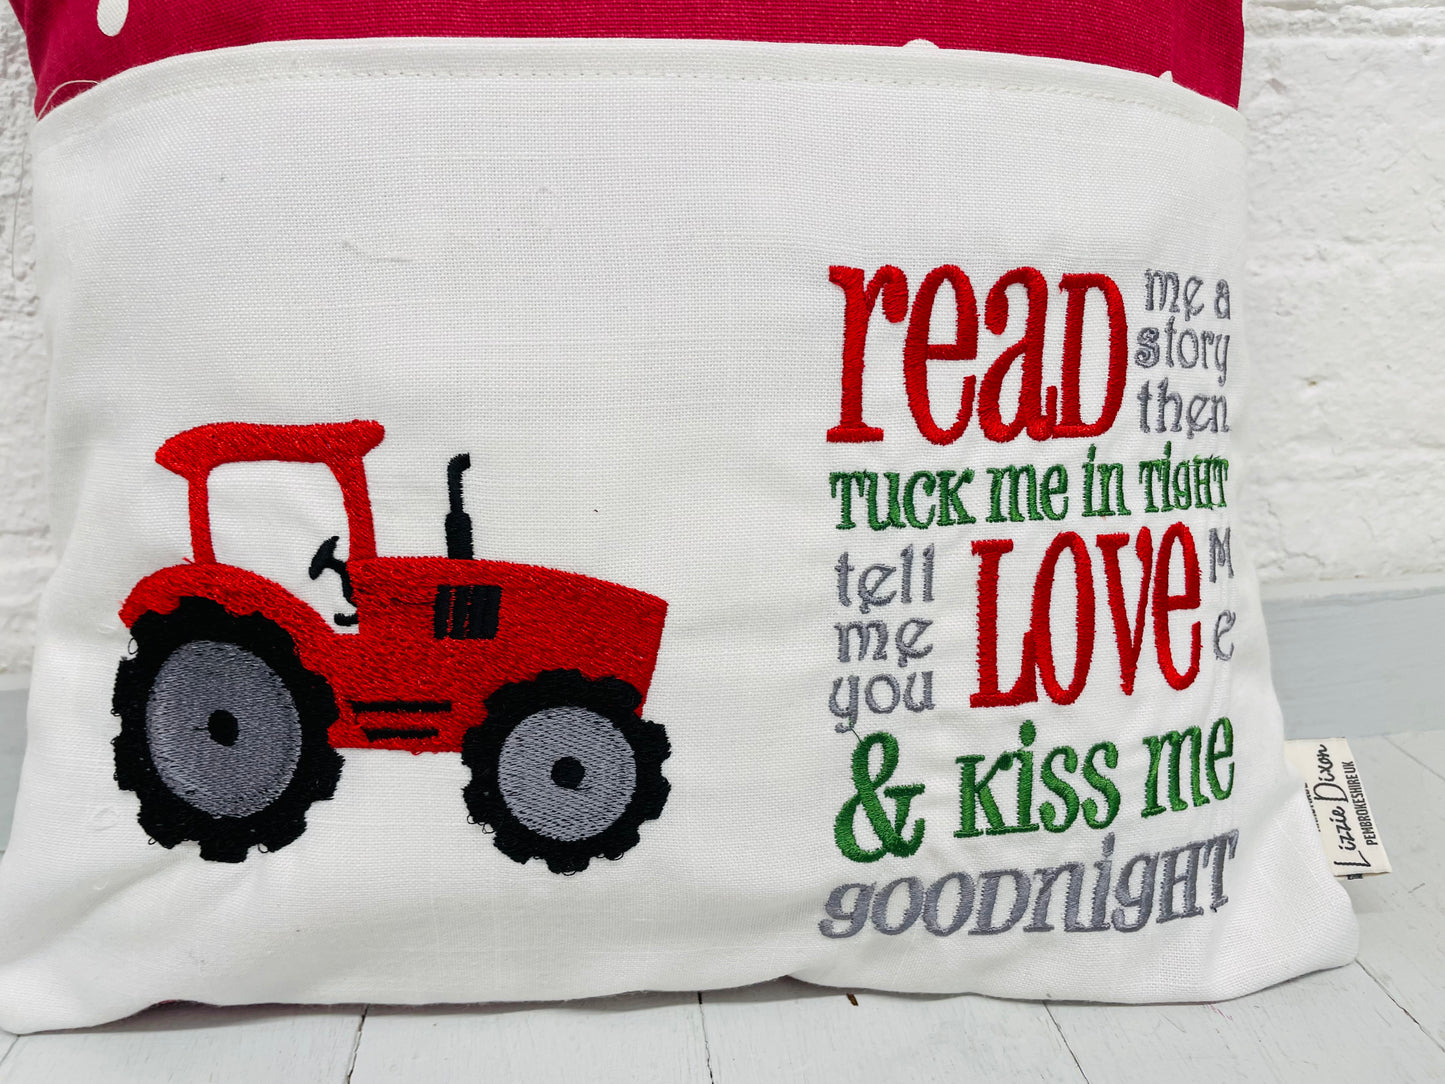 Red Tractor Children's Reading Book Cushion.